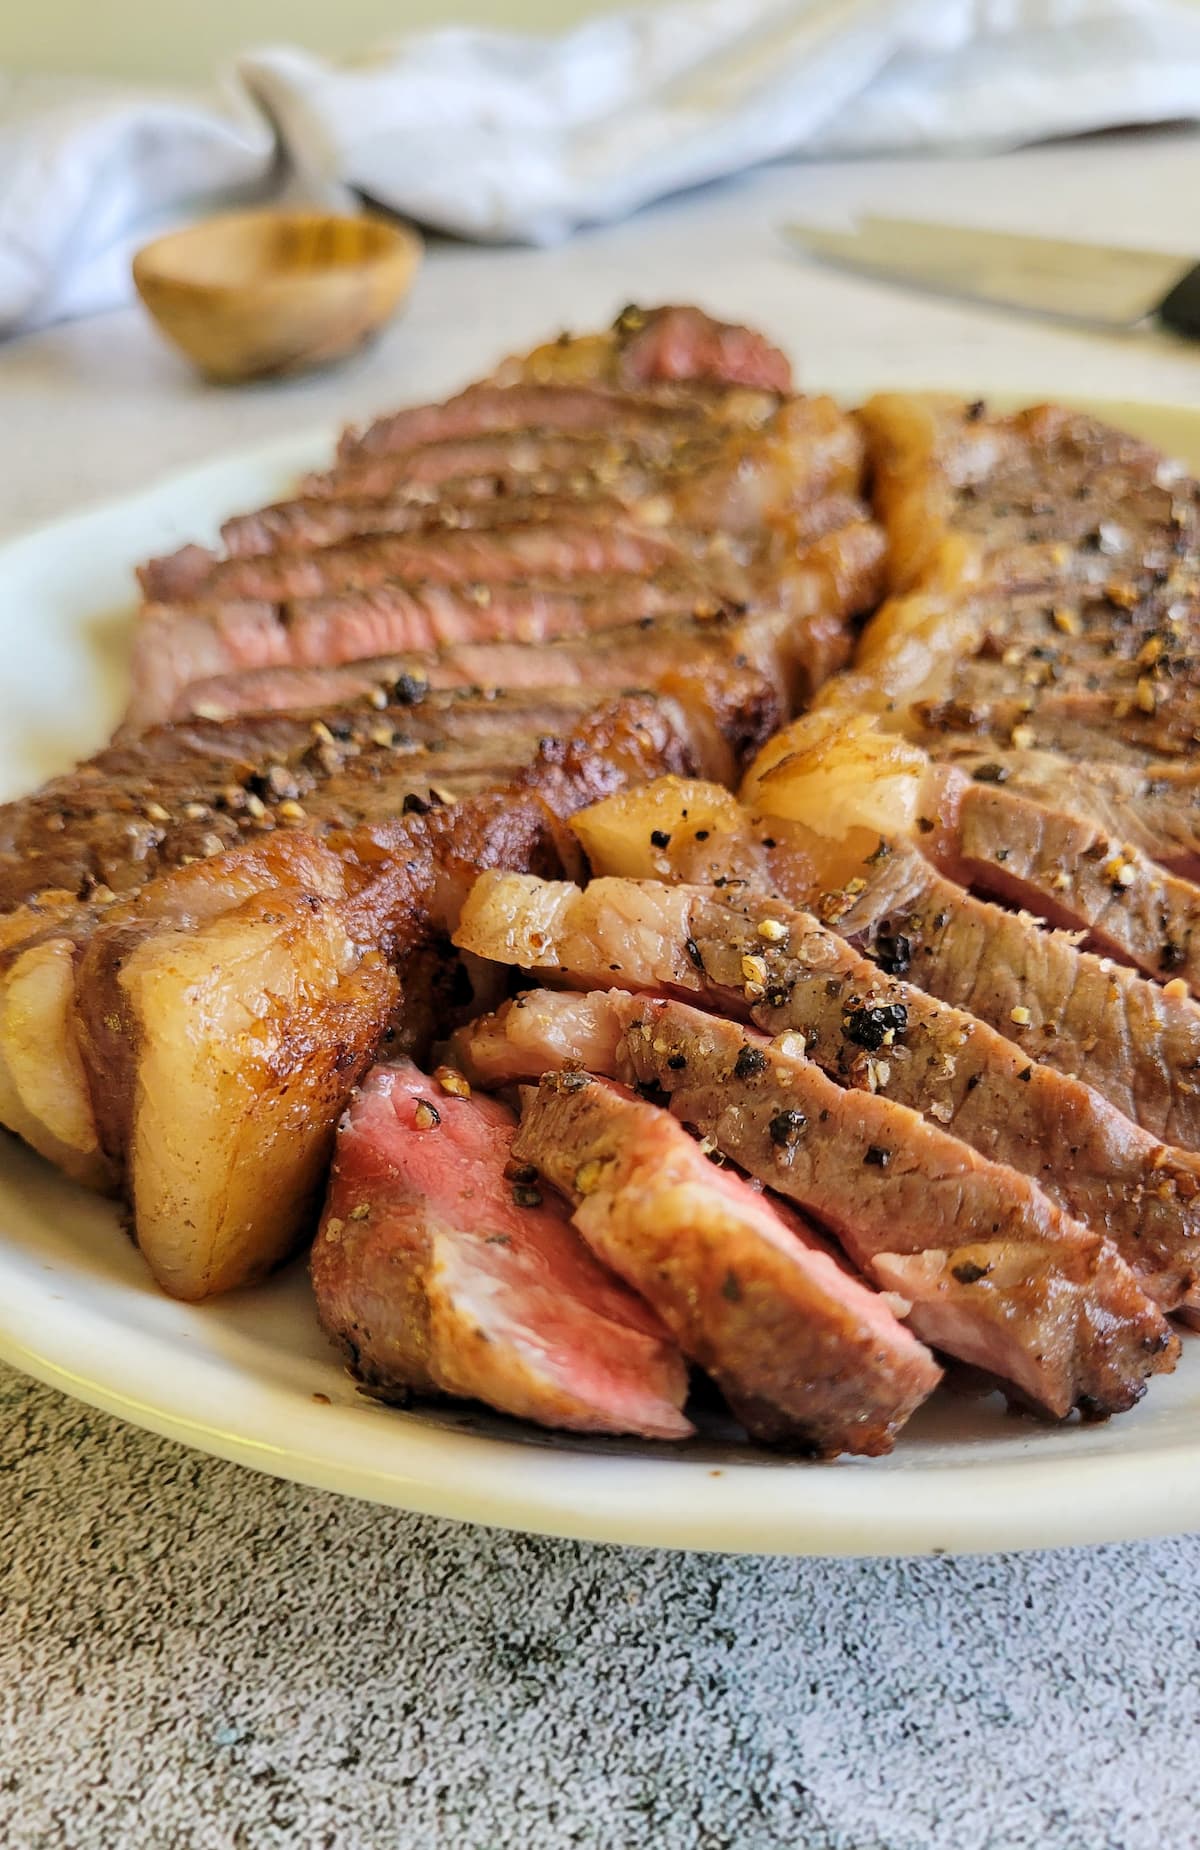 side view of two sliced steaks on a plate